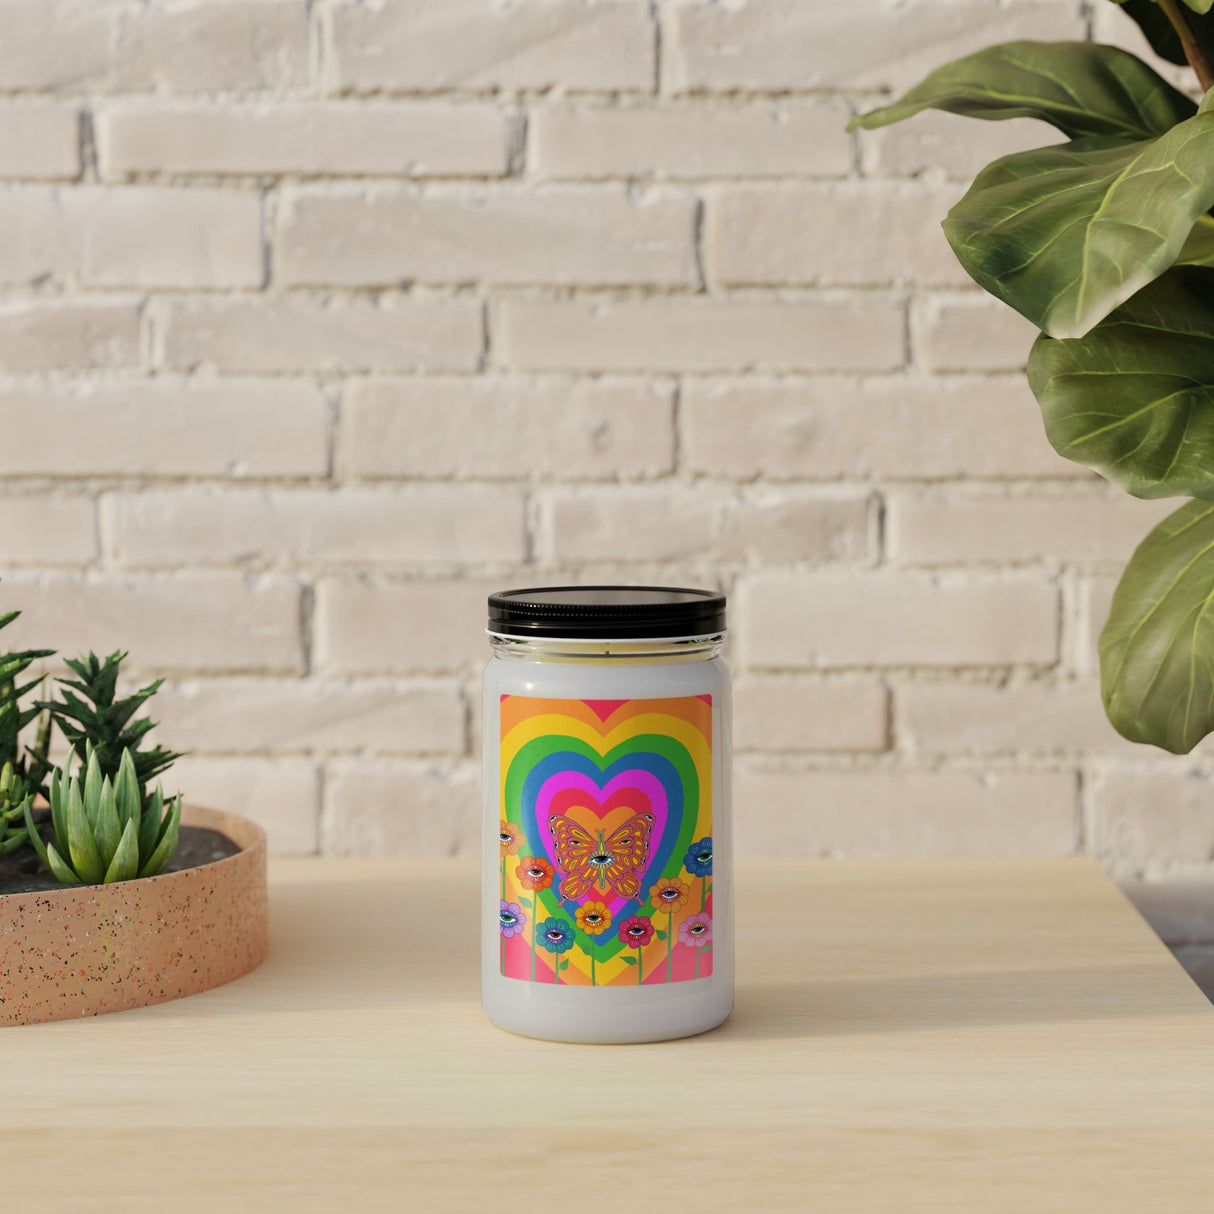 Vivillus Scented Candle in Mason Jar: Eye Butterfly - Candlefy